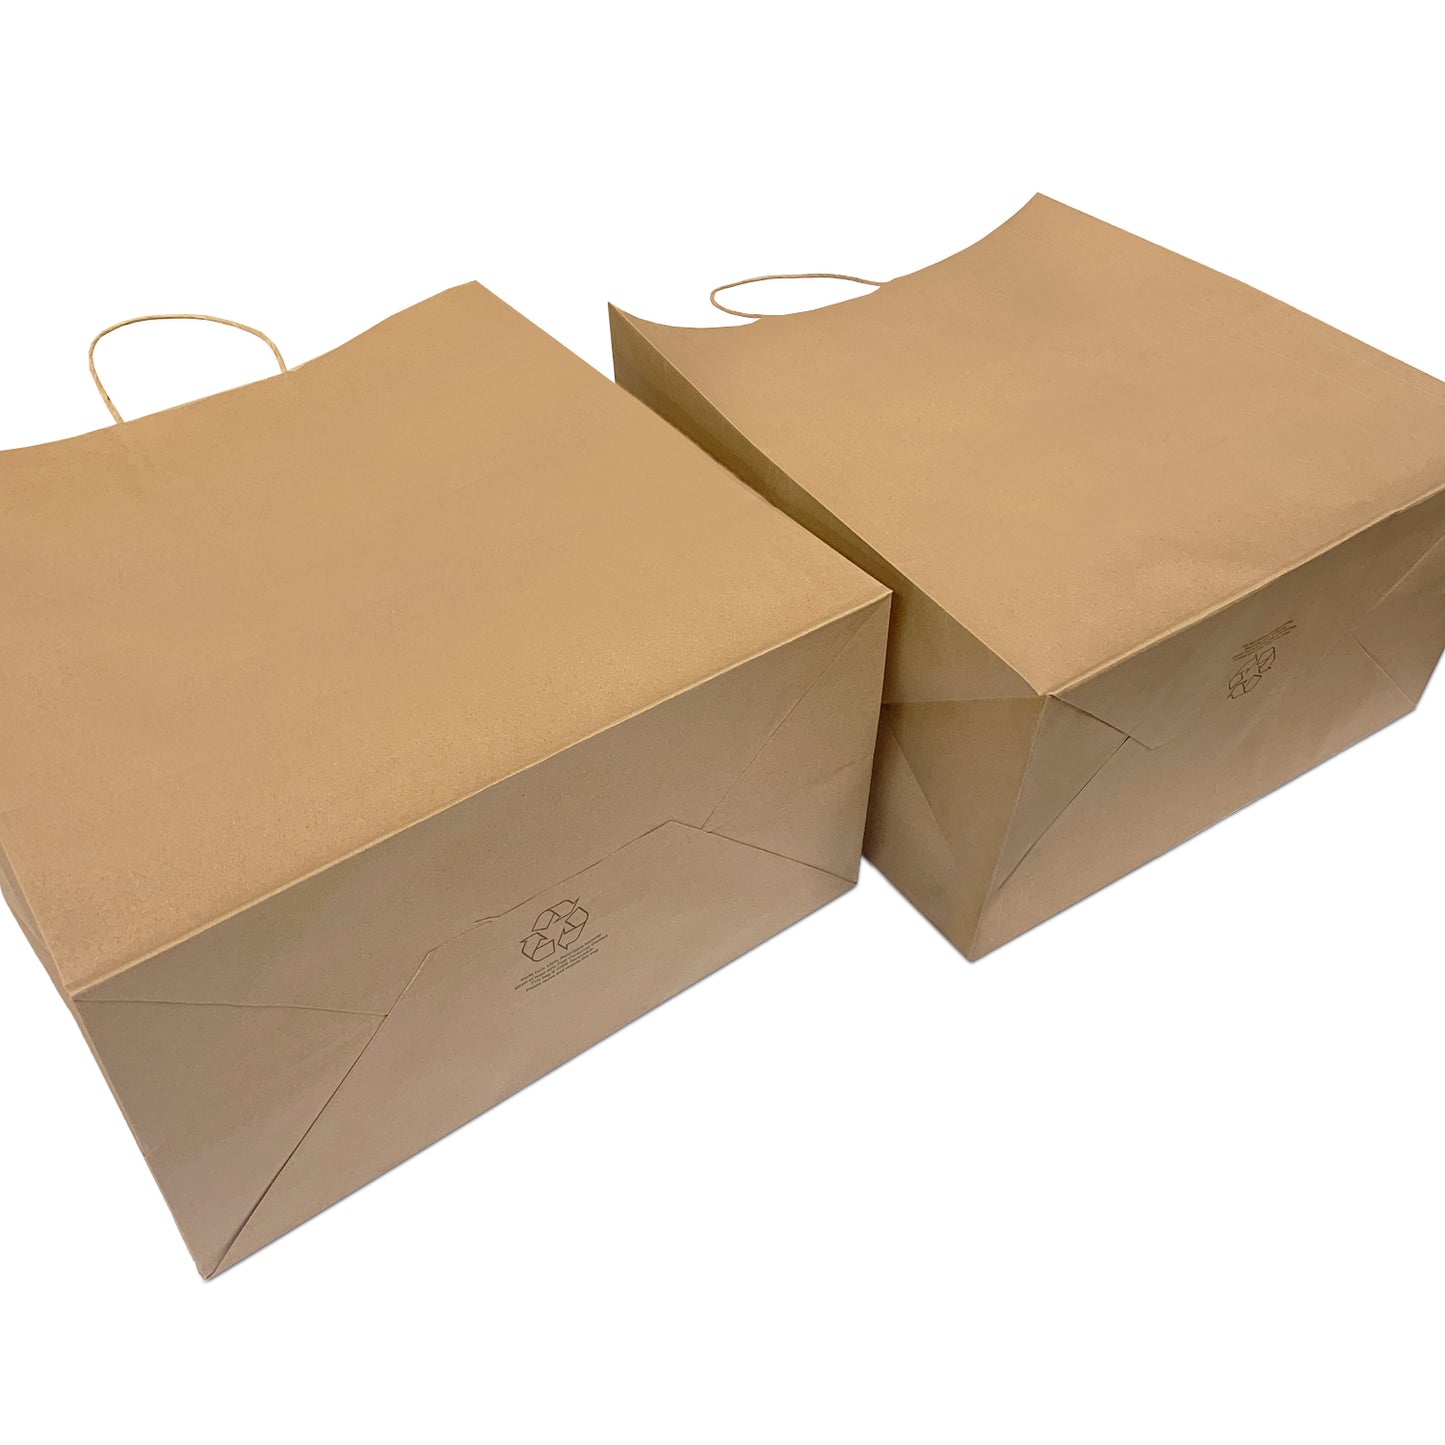 200 Pcs, Tiger,  14x8x14 inches, Kraft Paper Bags, with Twisted handle